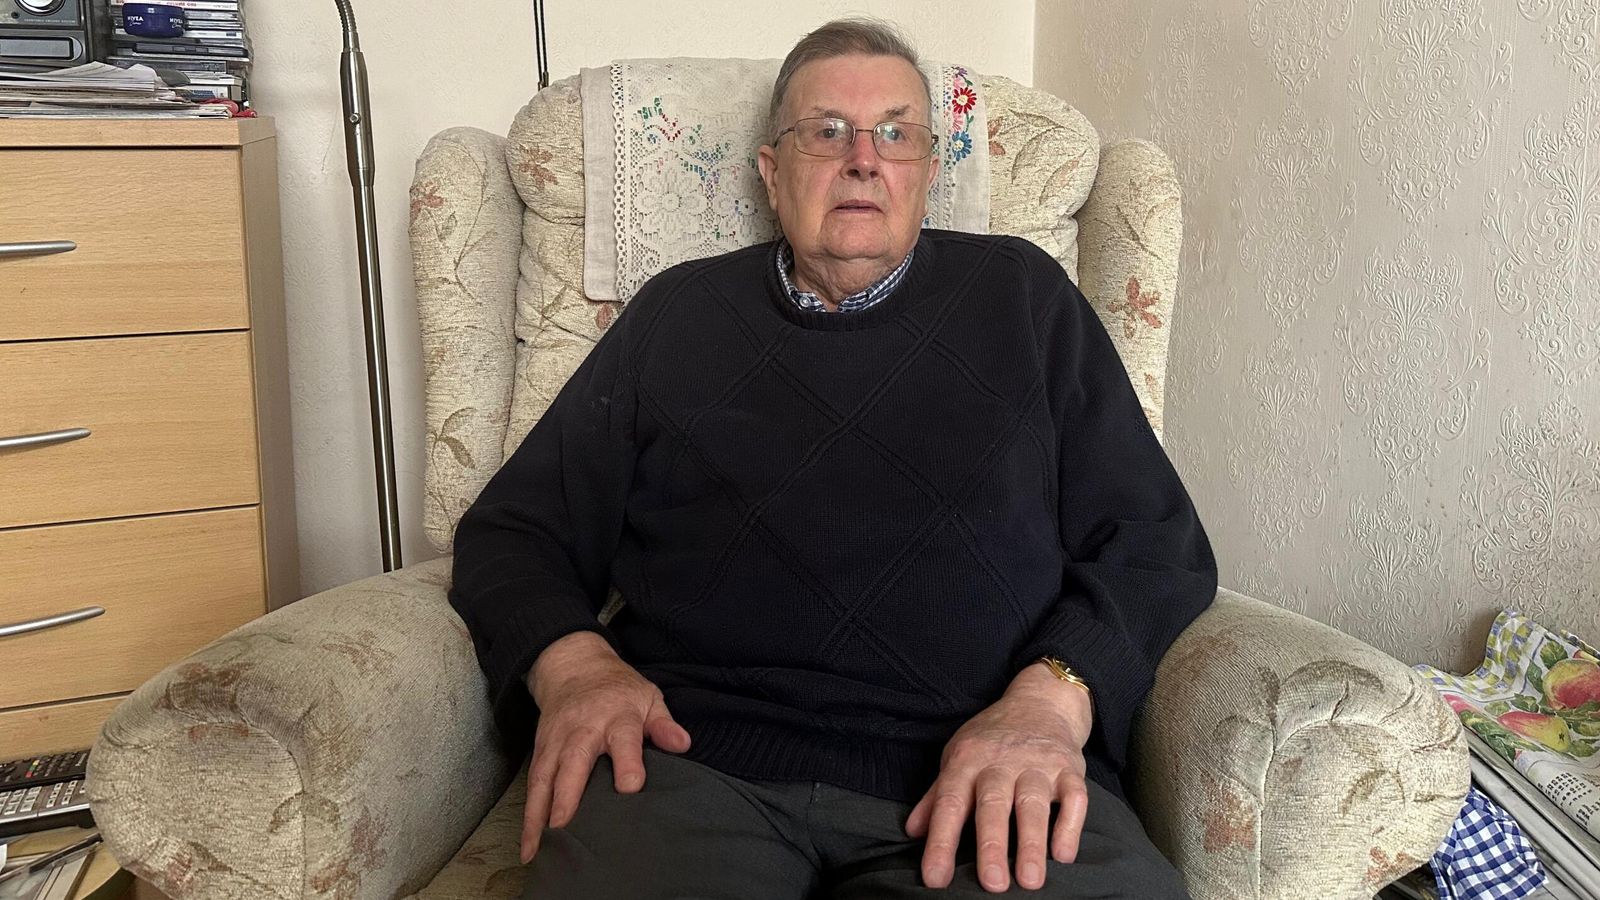 Pensioner, 90, hit with £17,000 ground rent bill -  as next government faces call to abolish 'medieval leasehold system'